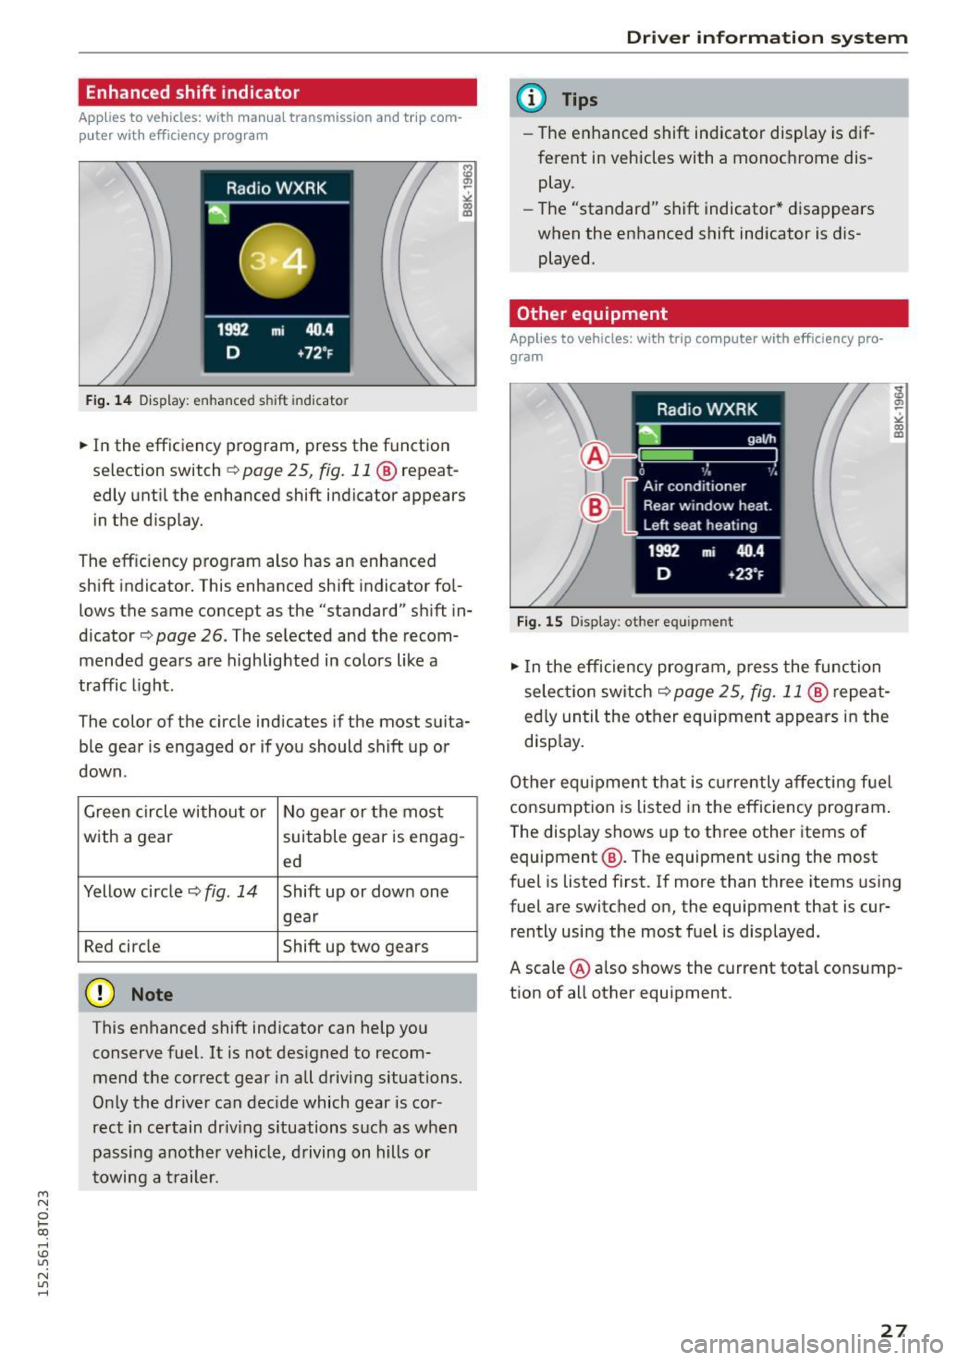 AUDI A5 2015  Owner´s Manual M N 
0 l­oo 
rl I.O 
" N 
" rl 
Enhanced shift indicator 
Applies  to vehicles: with  manual transmission  and  trip com­
p uter  with  eff iciency  program 
Fig . 14 Display:  enhanced shift  ind